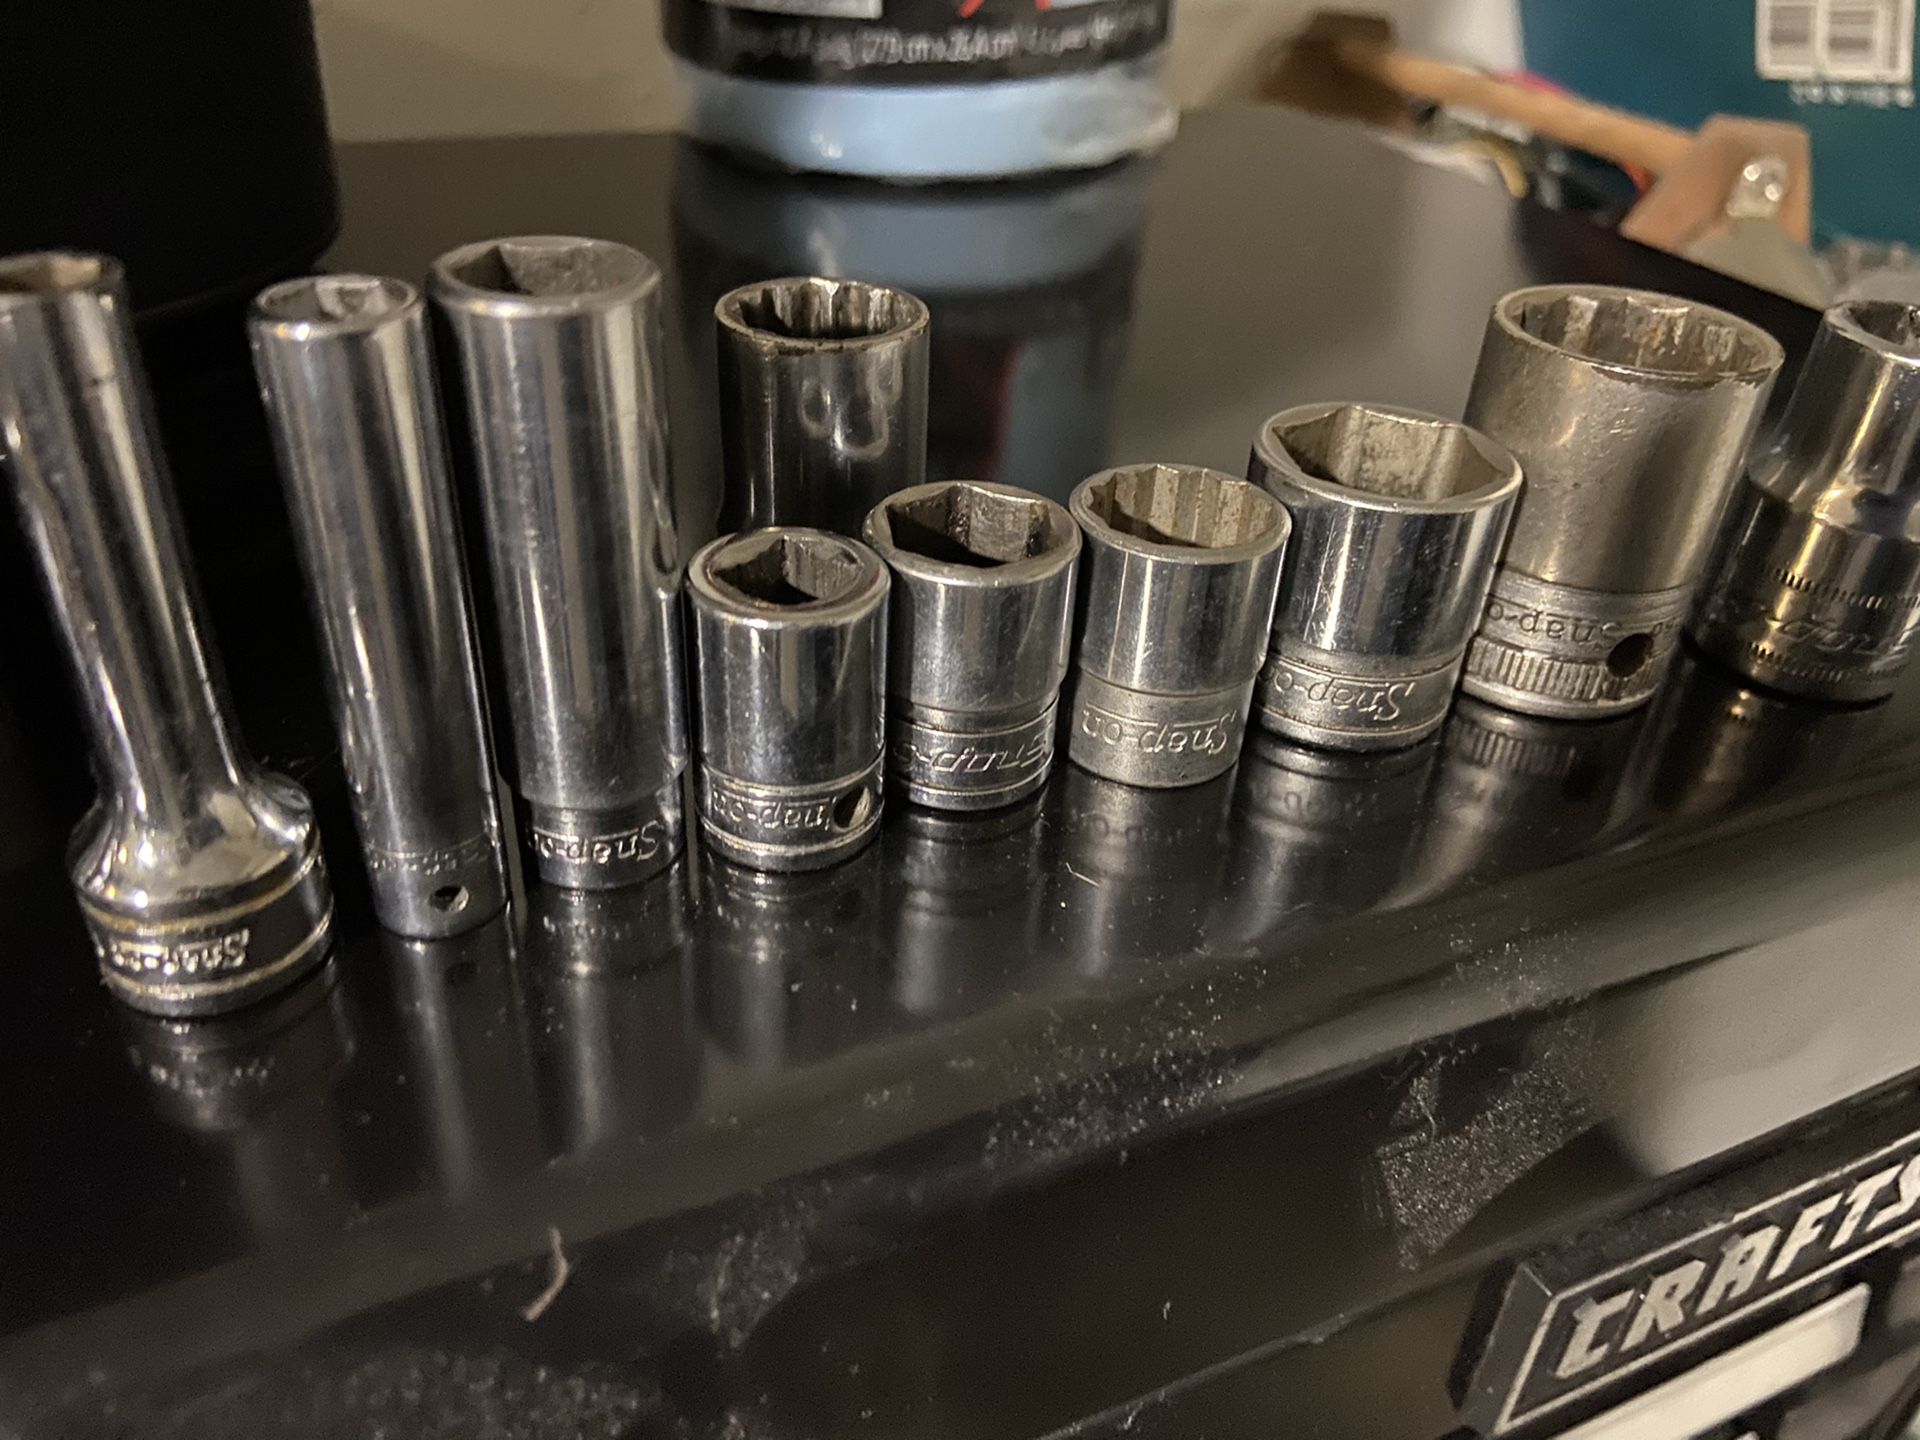 Snap on assorted sockets